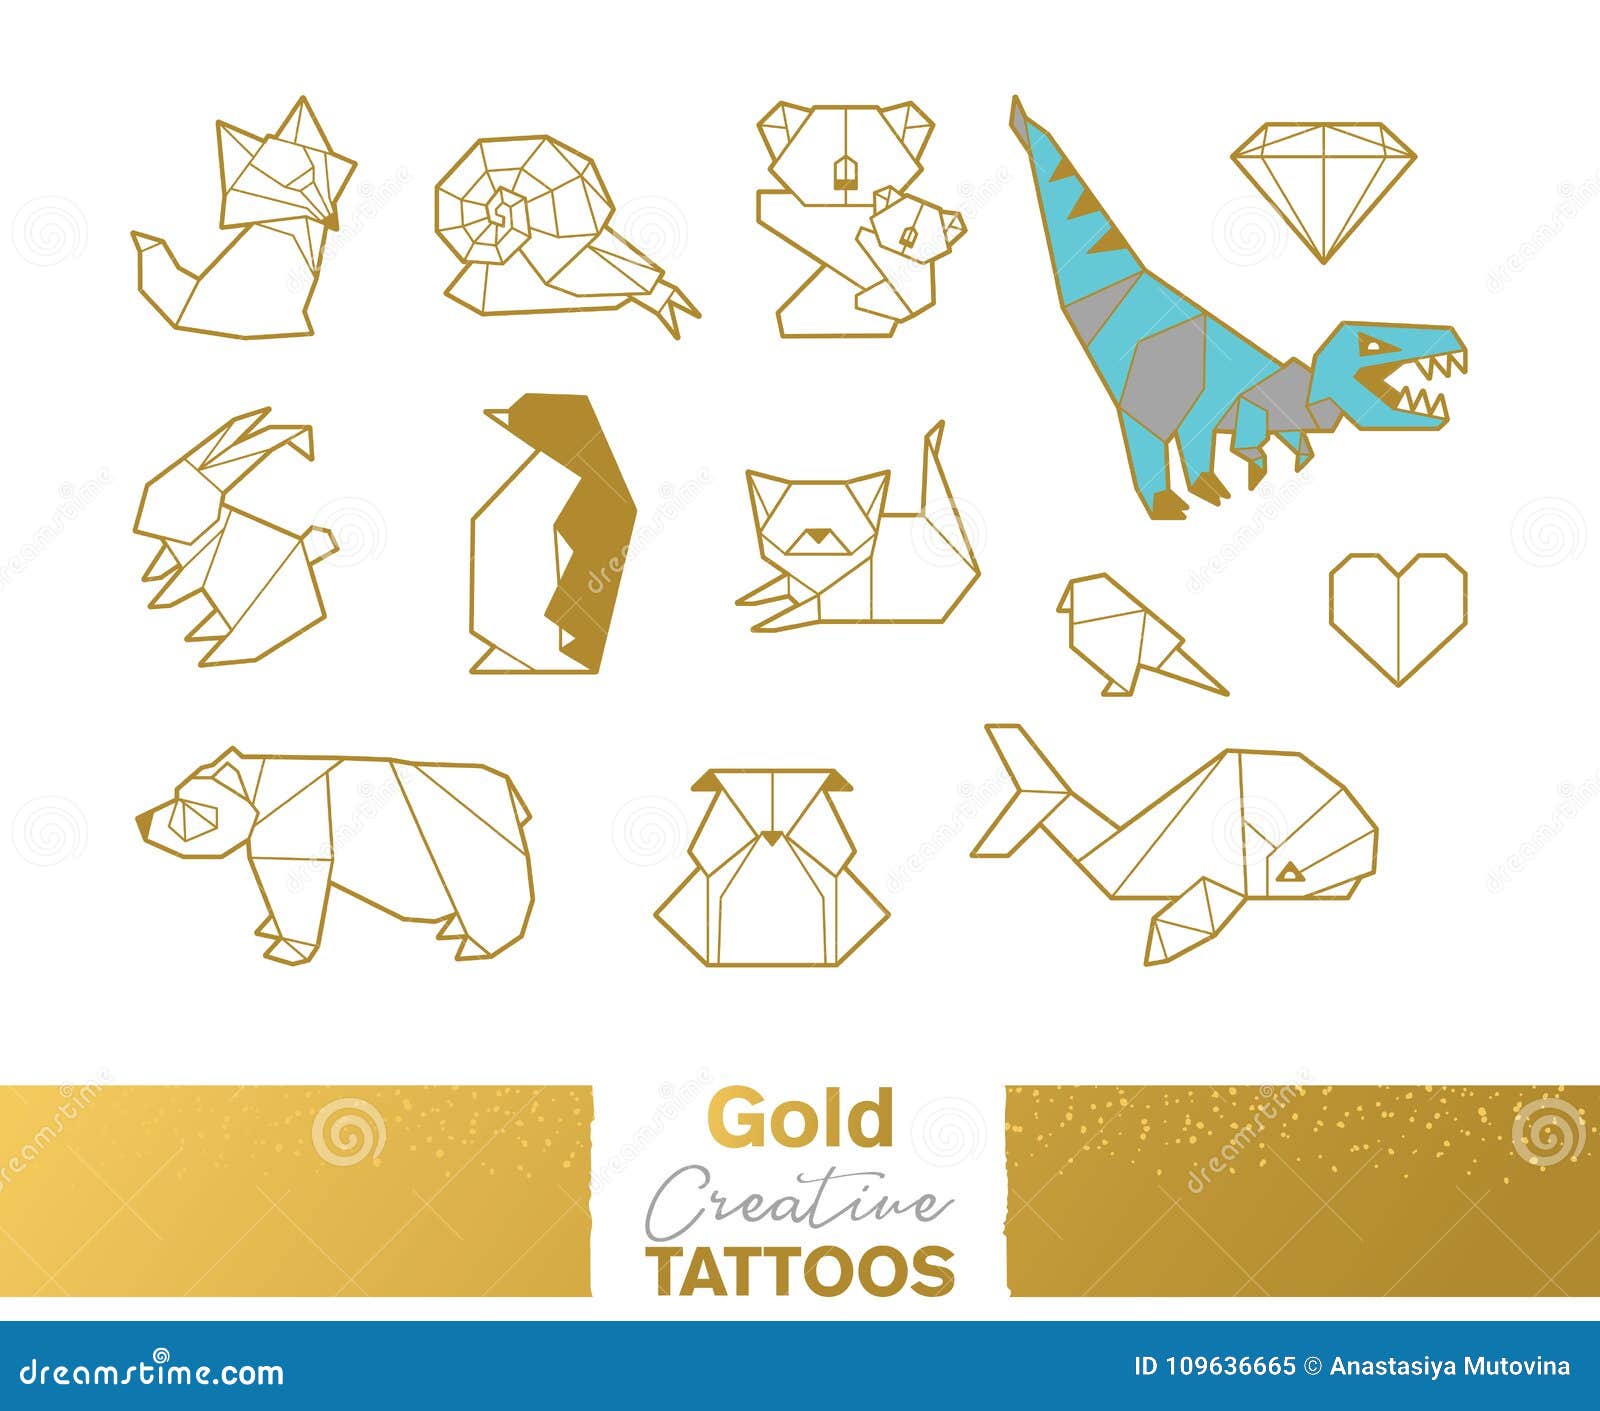 Flash Tattoos Isabella Authentic Metallic Temporary Jewelry Tattoos 4 Sheet  Pack (Metallic Gold/blue/green) Includes over 33 premium waterproof floral  inspired … | Jewelry tattoo, Gold tattoo, Metal tattoo